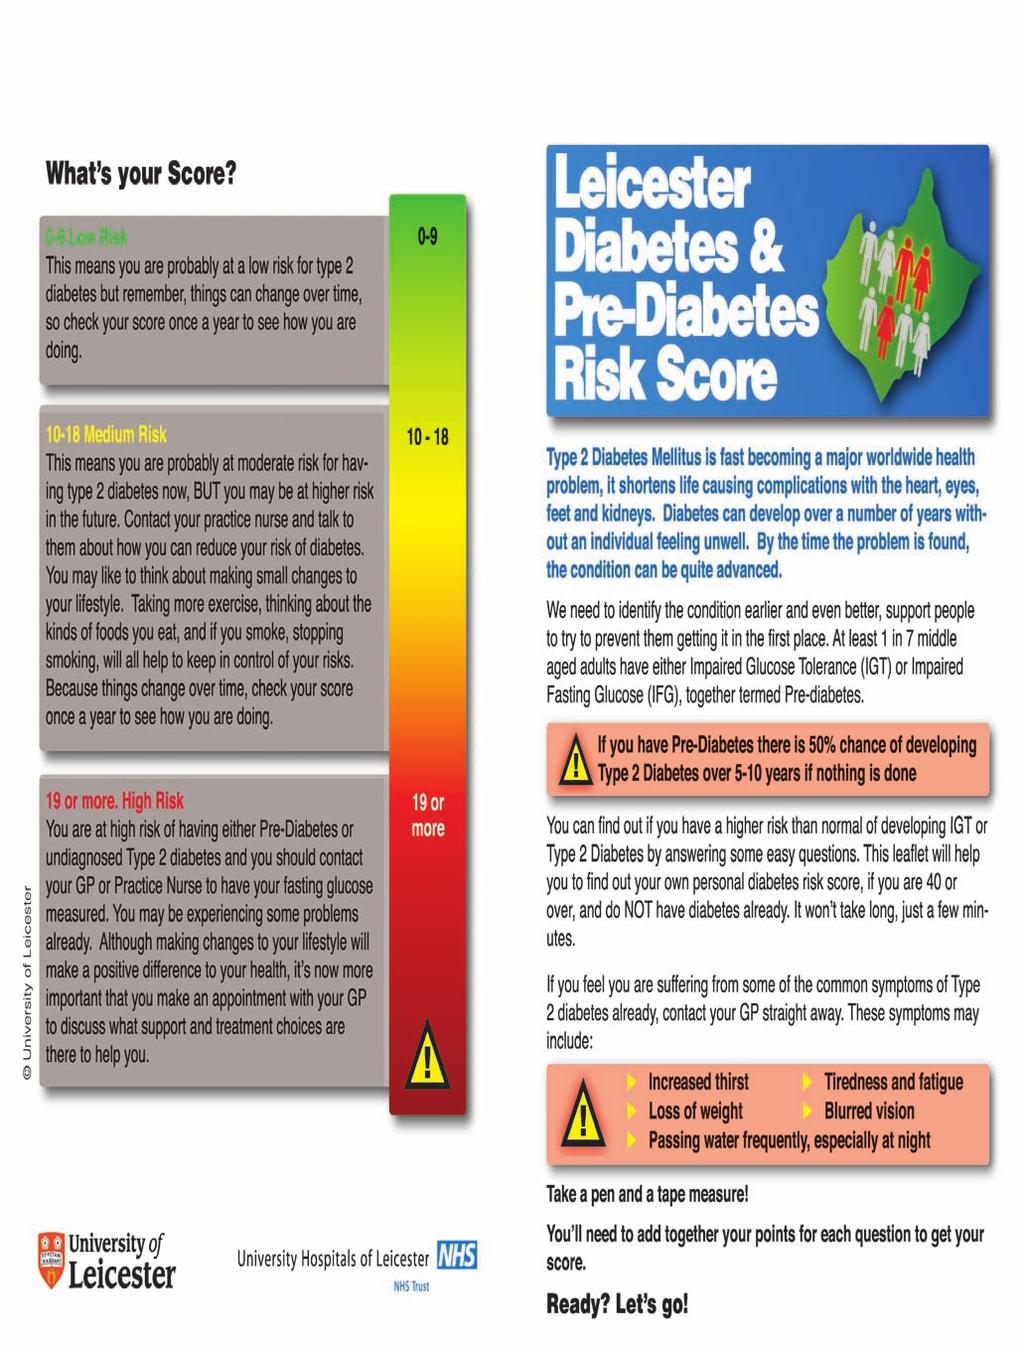 Example of Prototype Leicester Diabetes and Pre-diabetes Risk Score* * This is a prototype and is not subject to external validation or